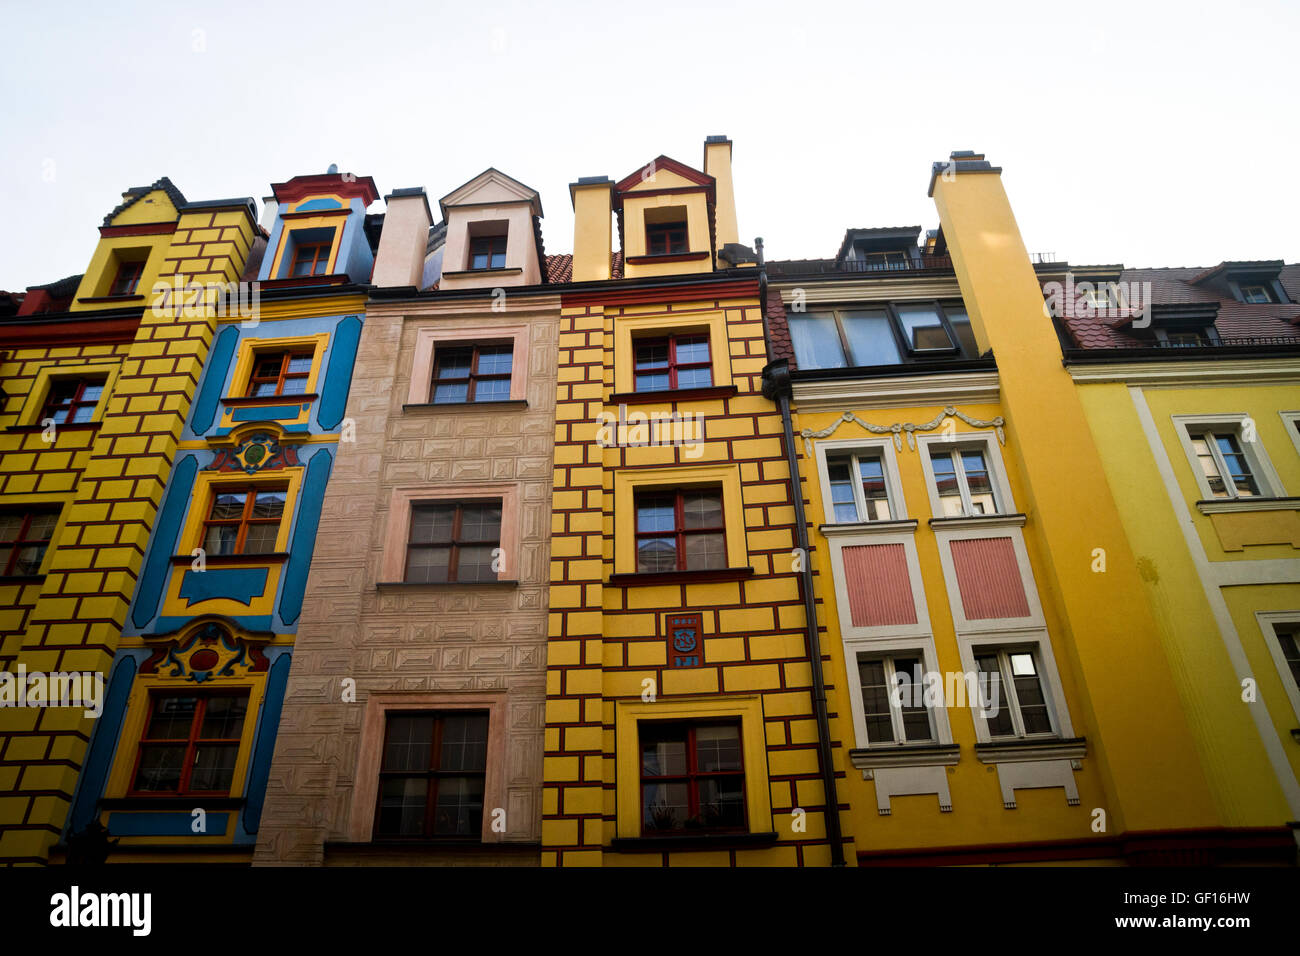 Tall, narrow houses with colourful facades line a street near the centre of Wroclaw, Poland. Stock Photo